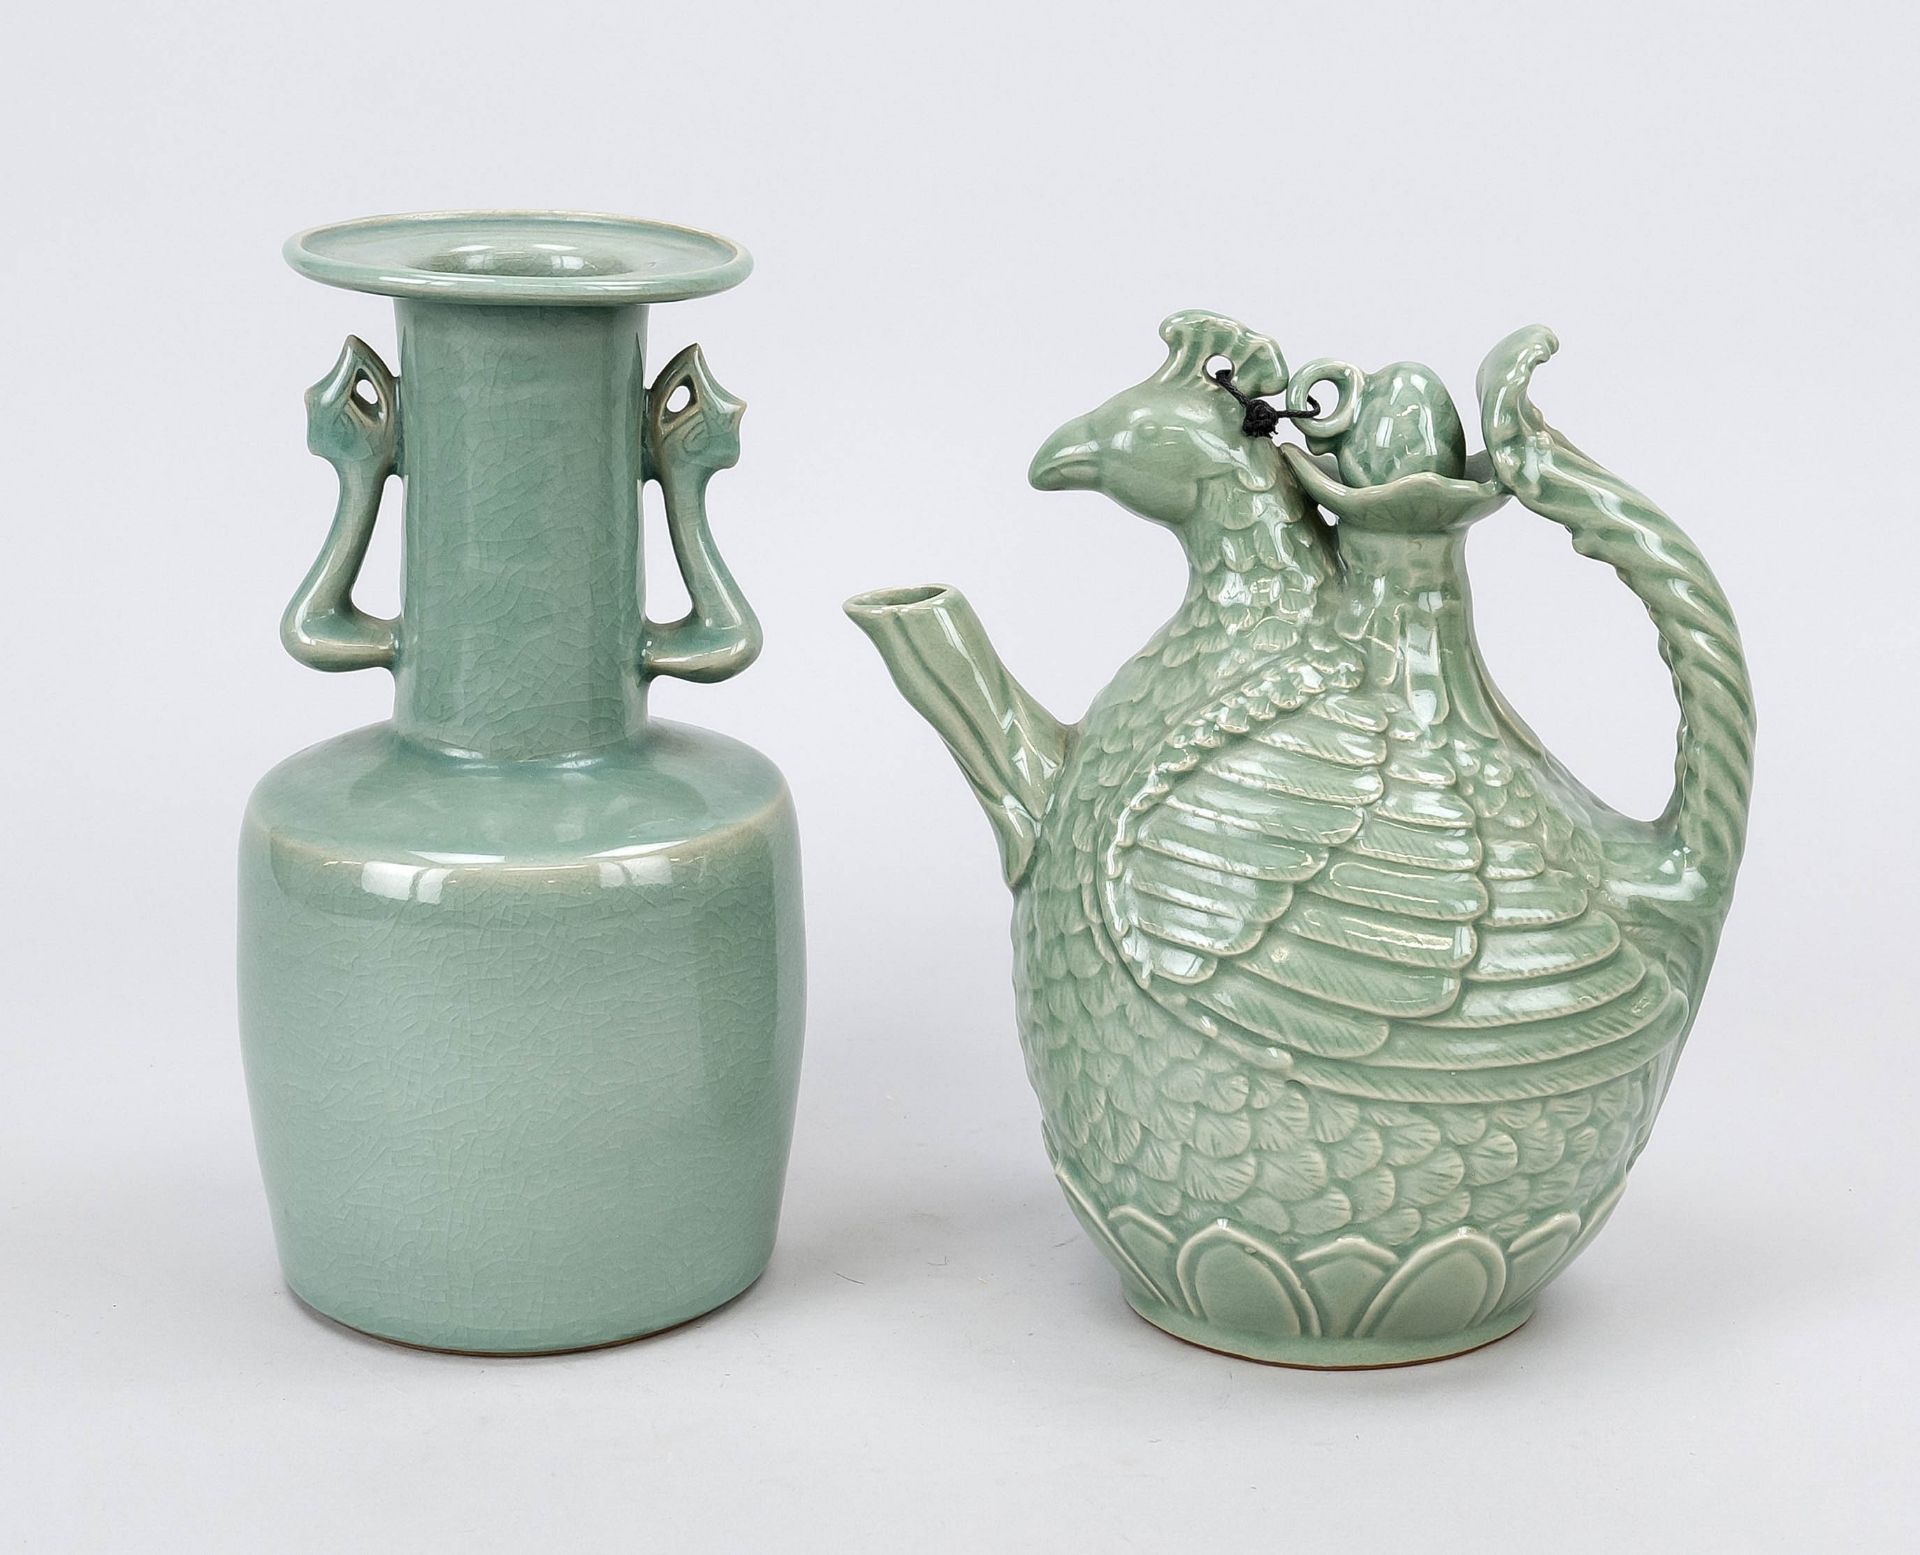 Teapot and mallet vase, Korea, 19th/20th century Both with a monochrome, celadon-colored glaze